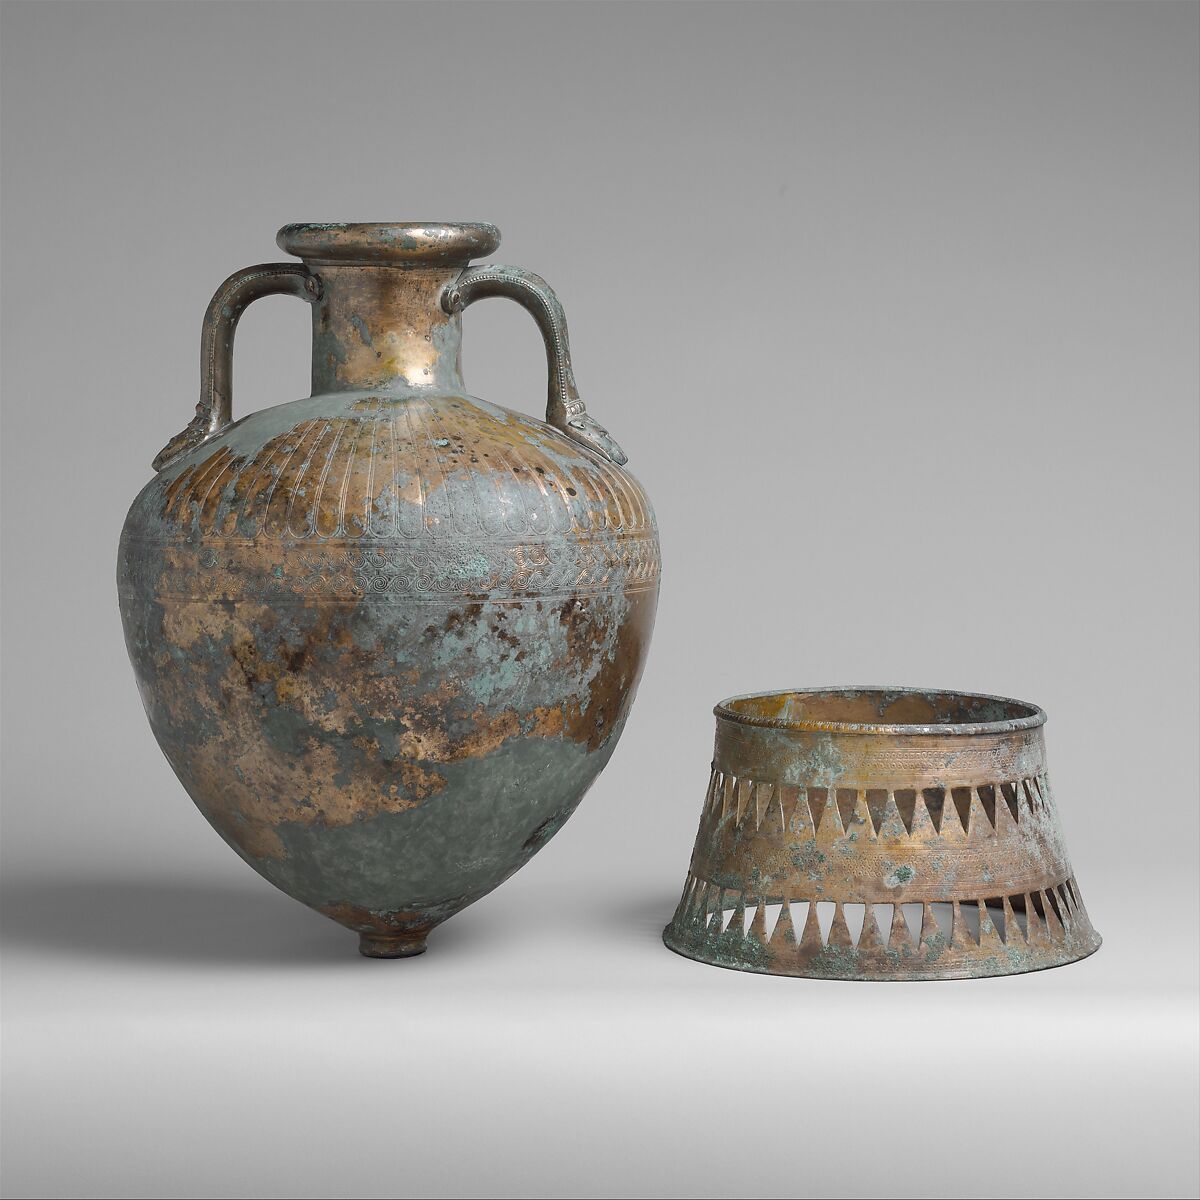 Bronze pointed neck-amphora with stand